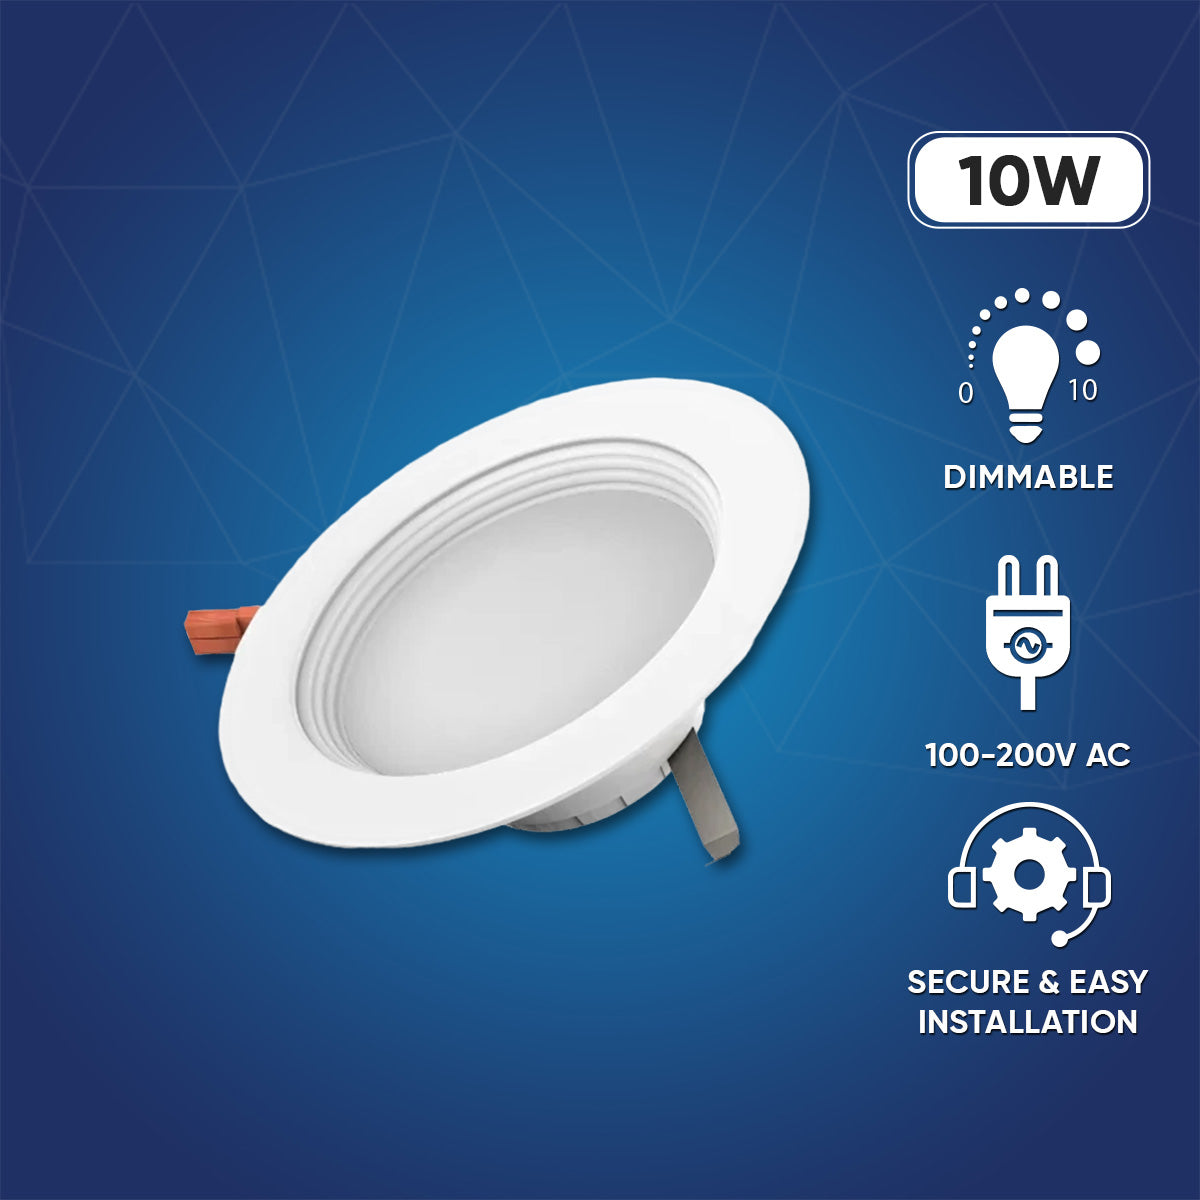 10w LED Downlights- Dimmable